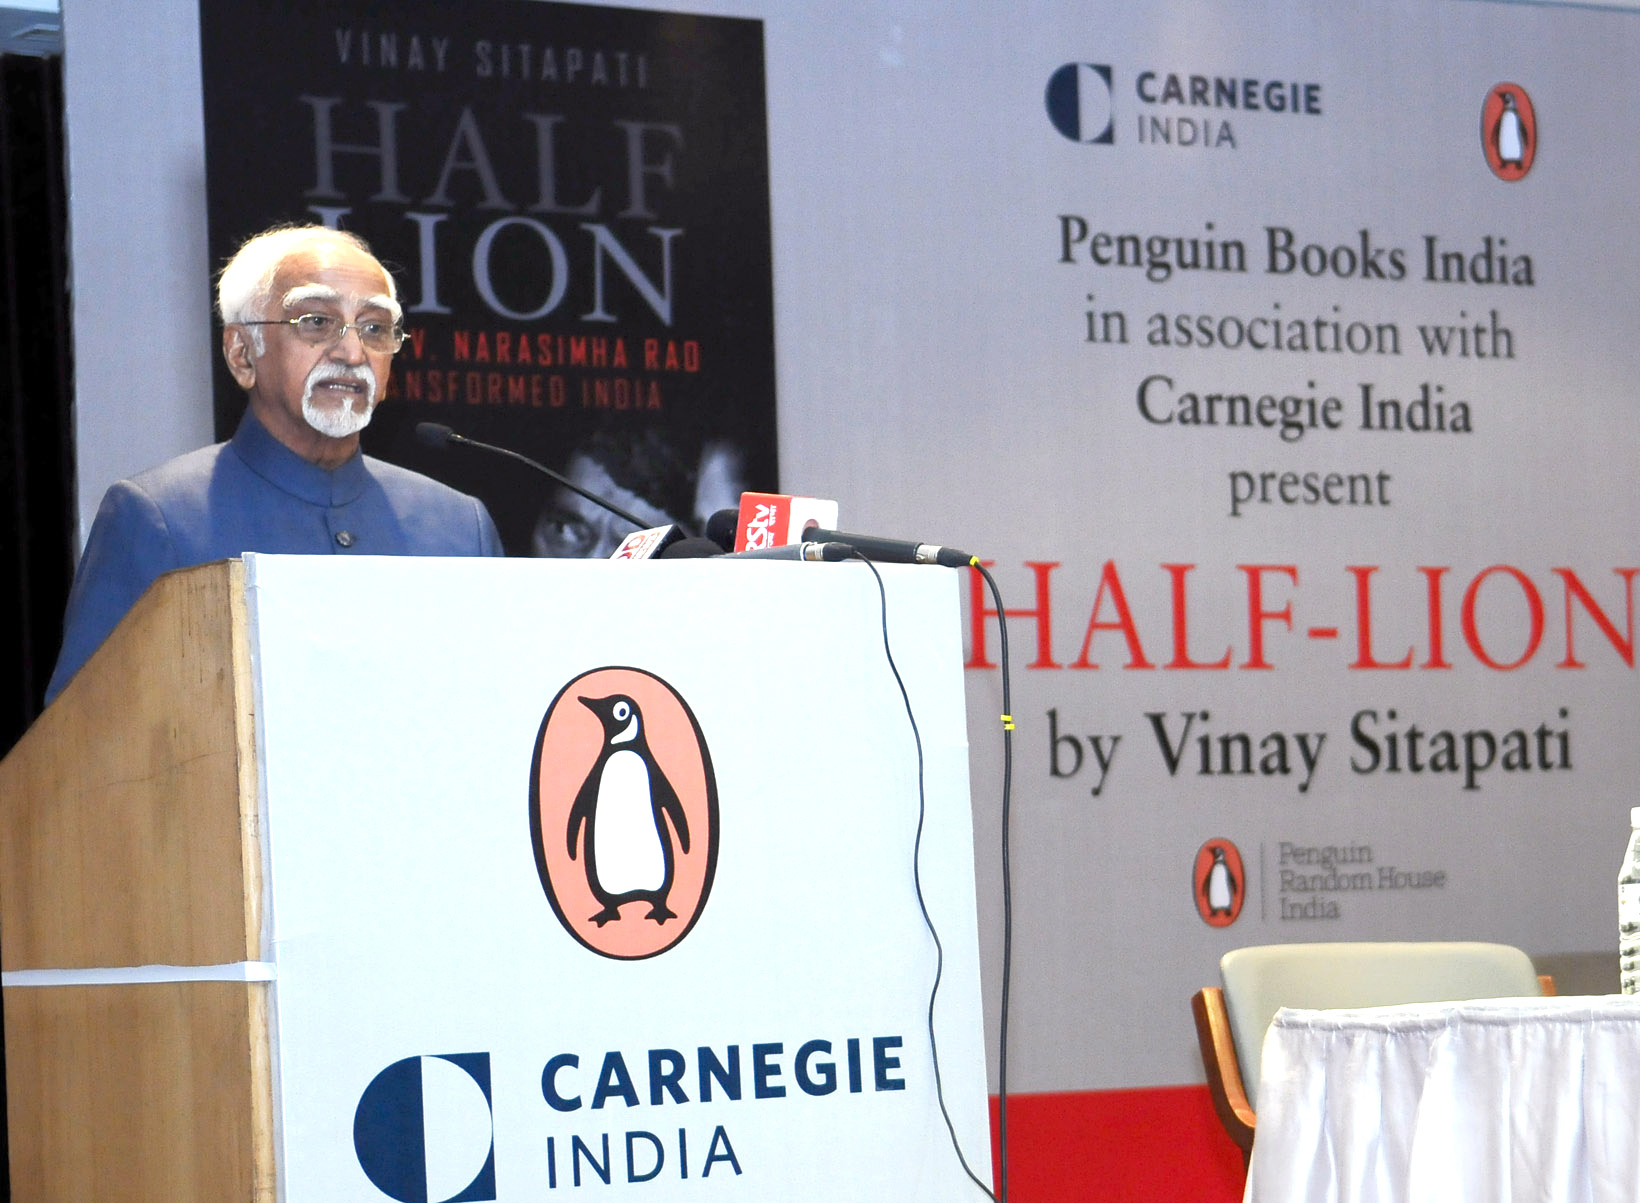 The Vice President, Shri M. Hamid Ansari addressing after releasing the book on P.V. Narasimha Rao titled ‘Half-Lion’, authored by Shri Vinay Sitapati, in New Delhi on June 27, 2016